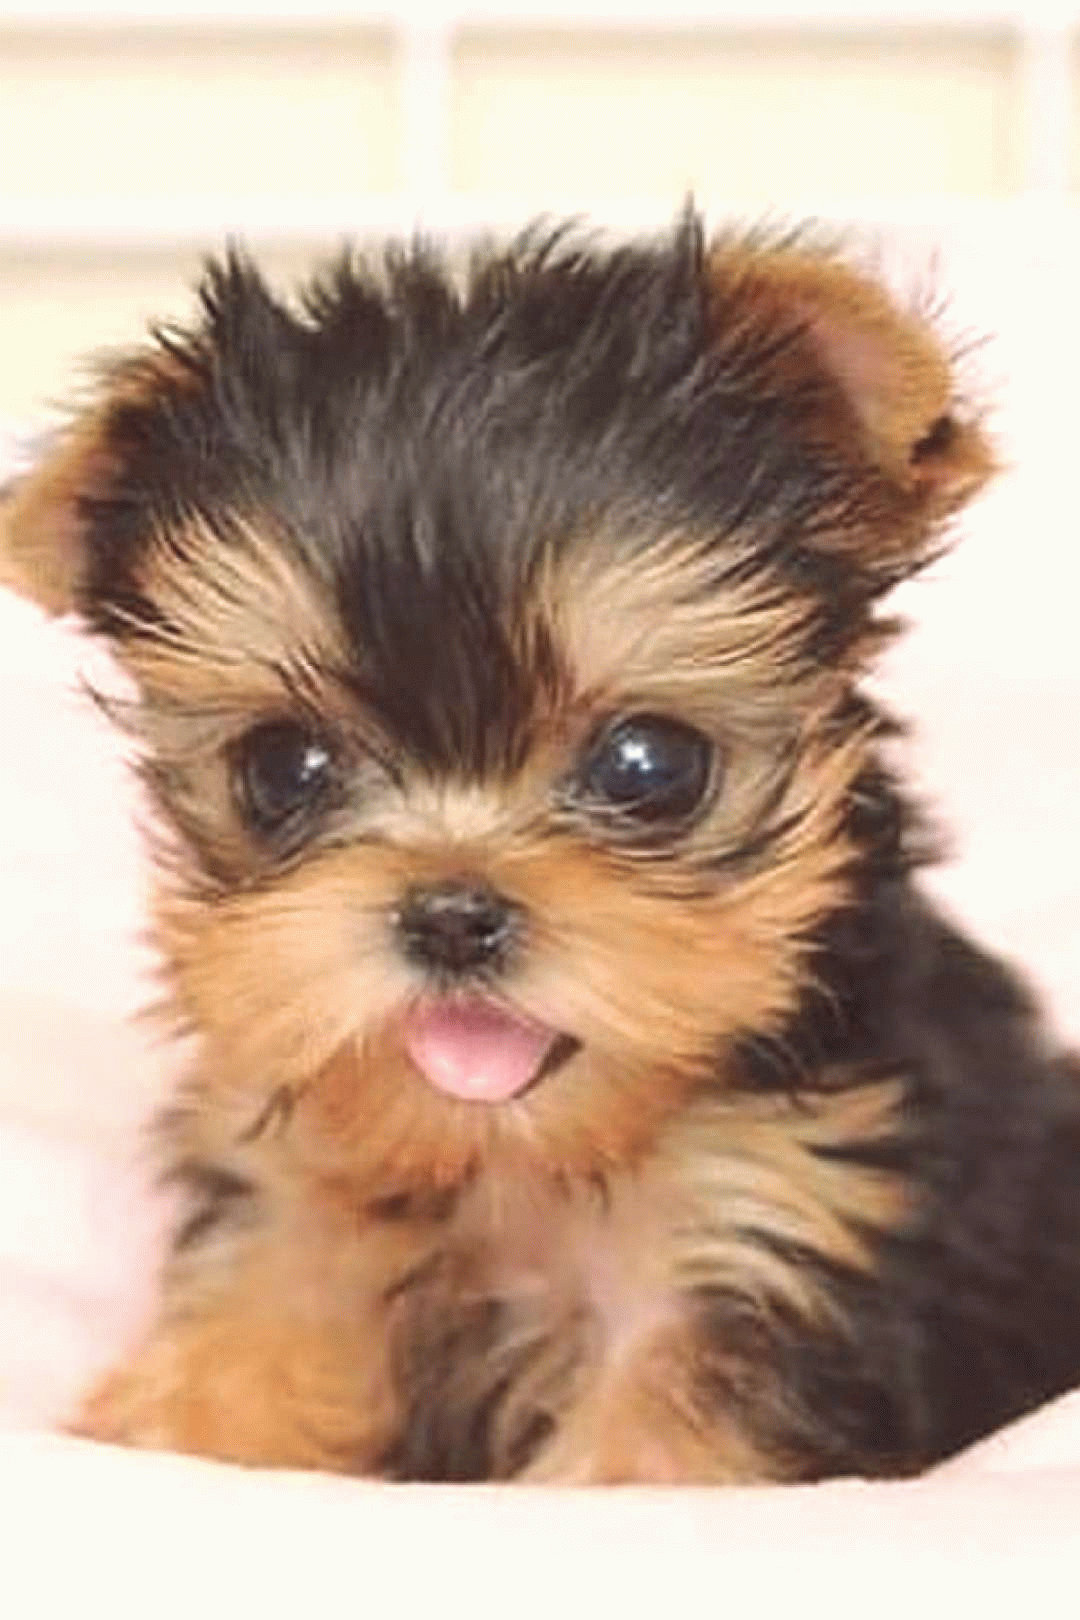 insects cute puppies small cutest dogs cute puppy stuff small